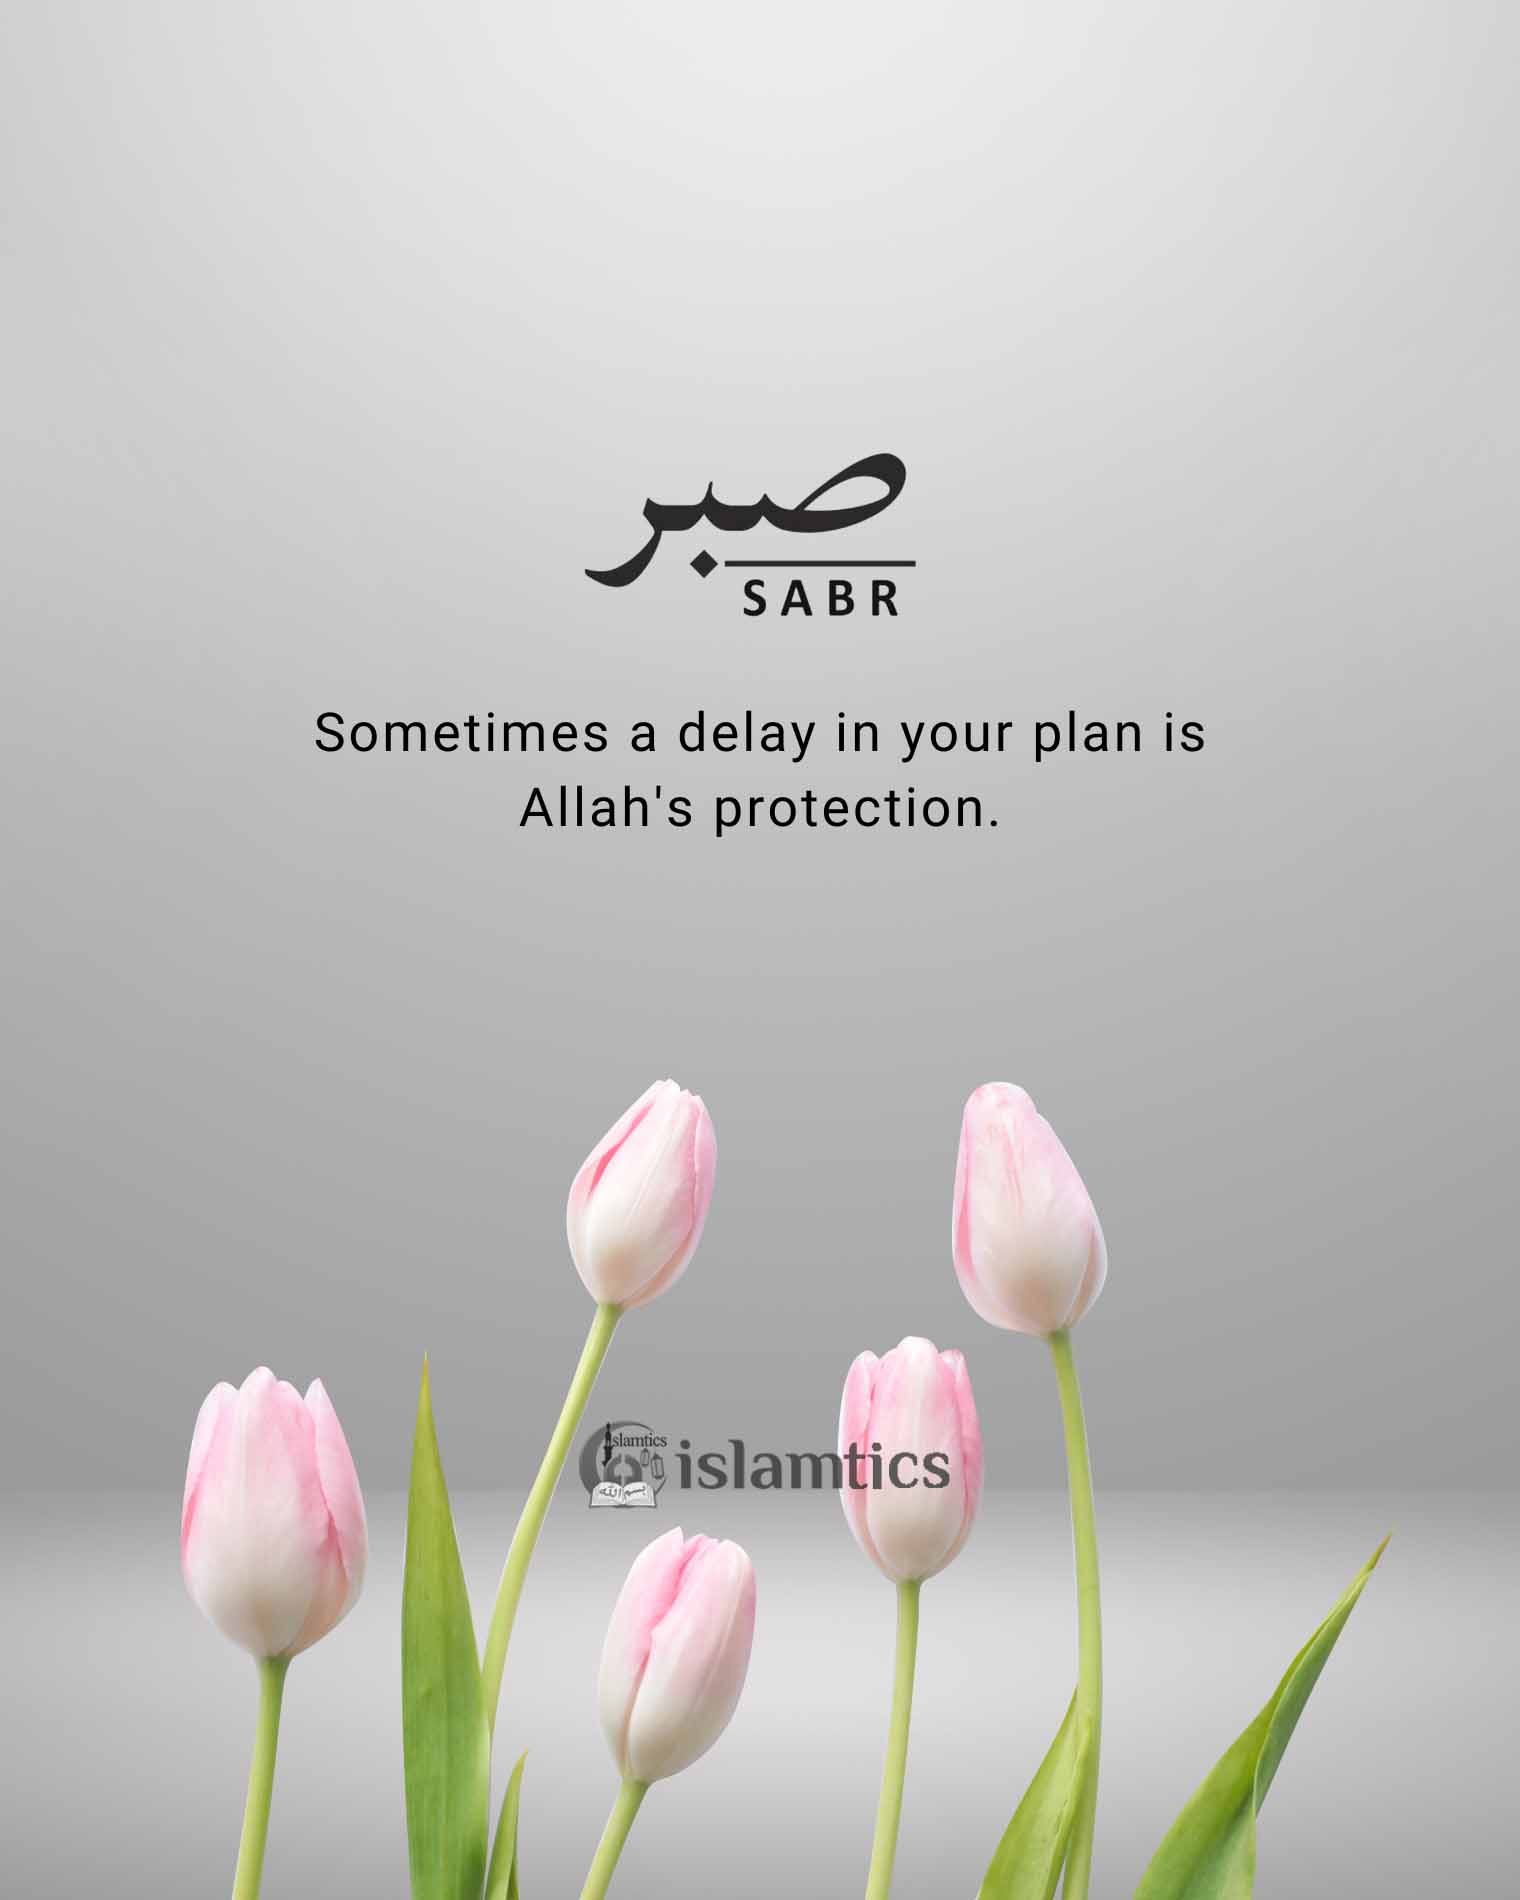  Sometimes a delay in your plan is Allah’s protection.